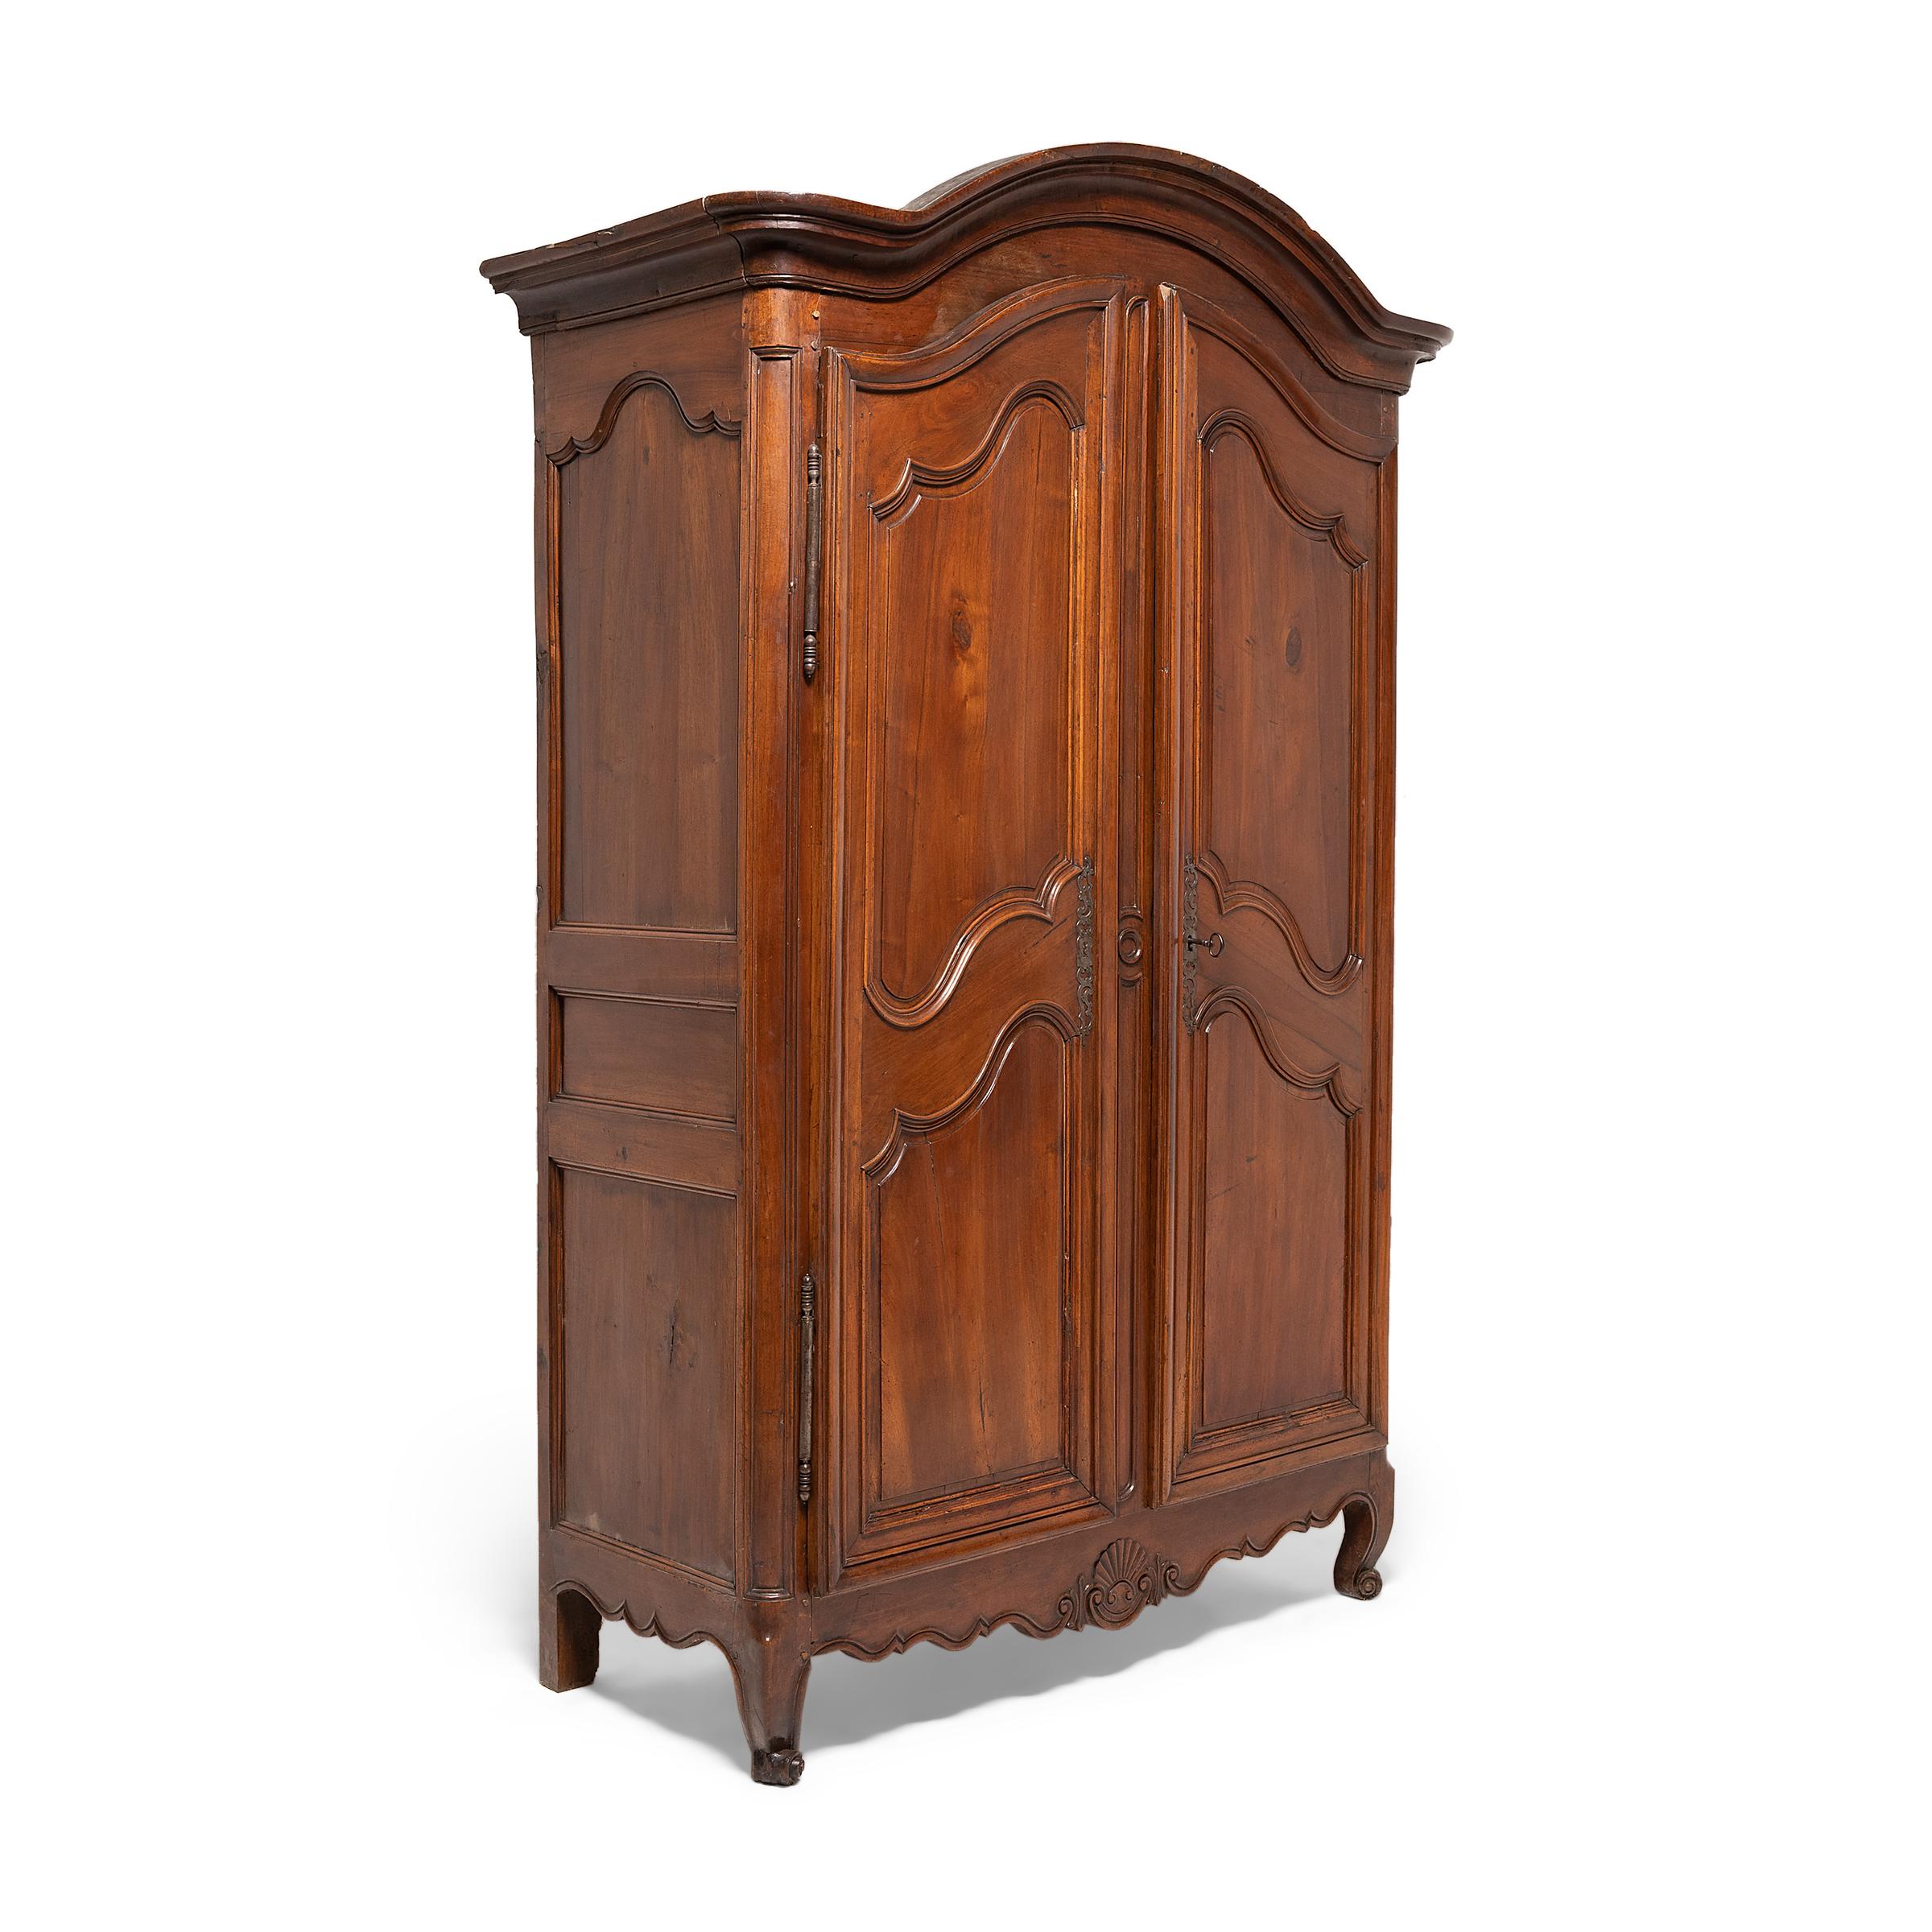 This elegant French armoire dates to the mid- to late-18th century and is a timeless example of French Provincial and Louis XV styles. The large wardrobe has a Classic form, with short cabriole legs, straight sides decorated with inset panels, and